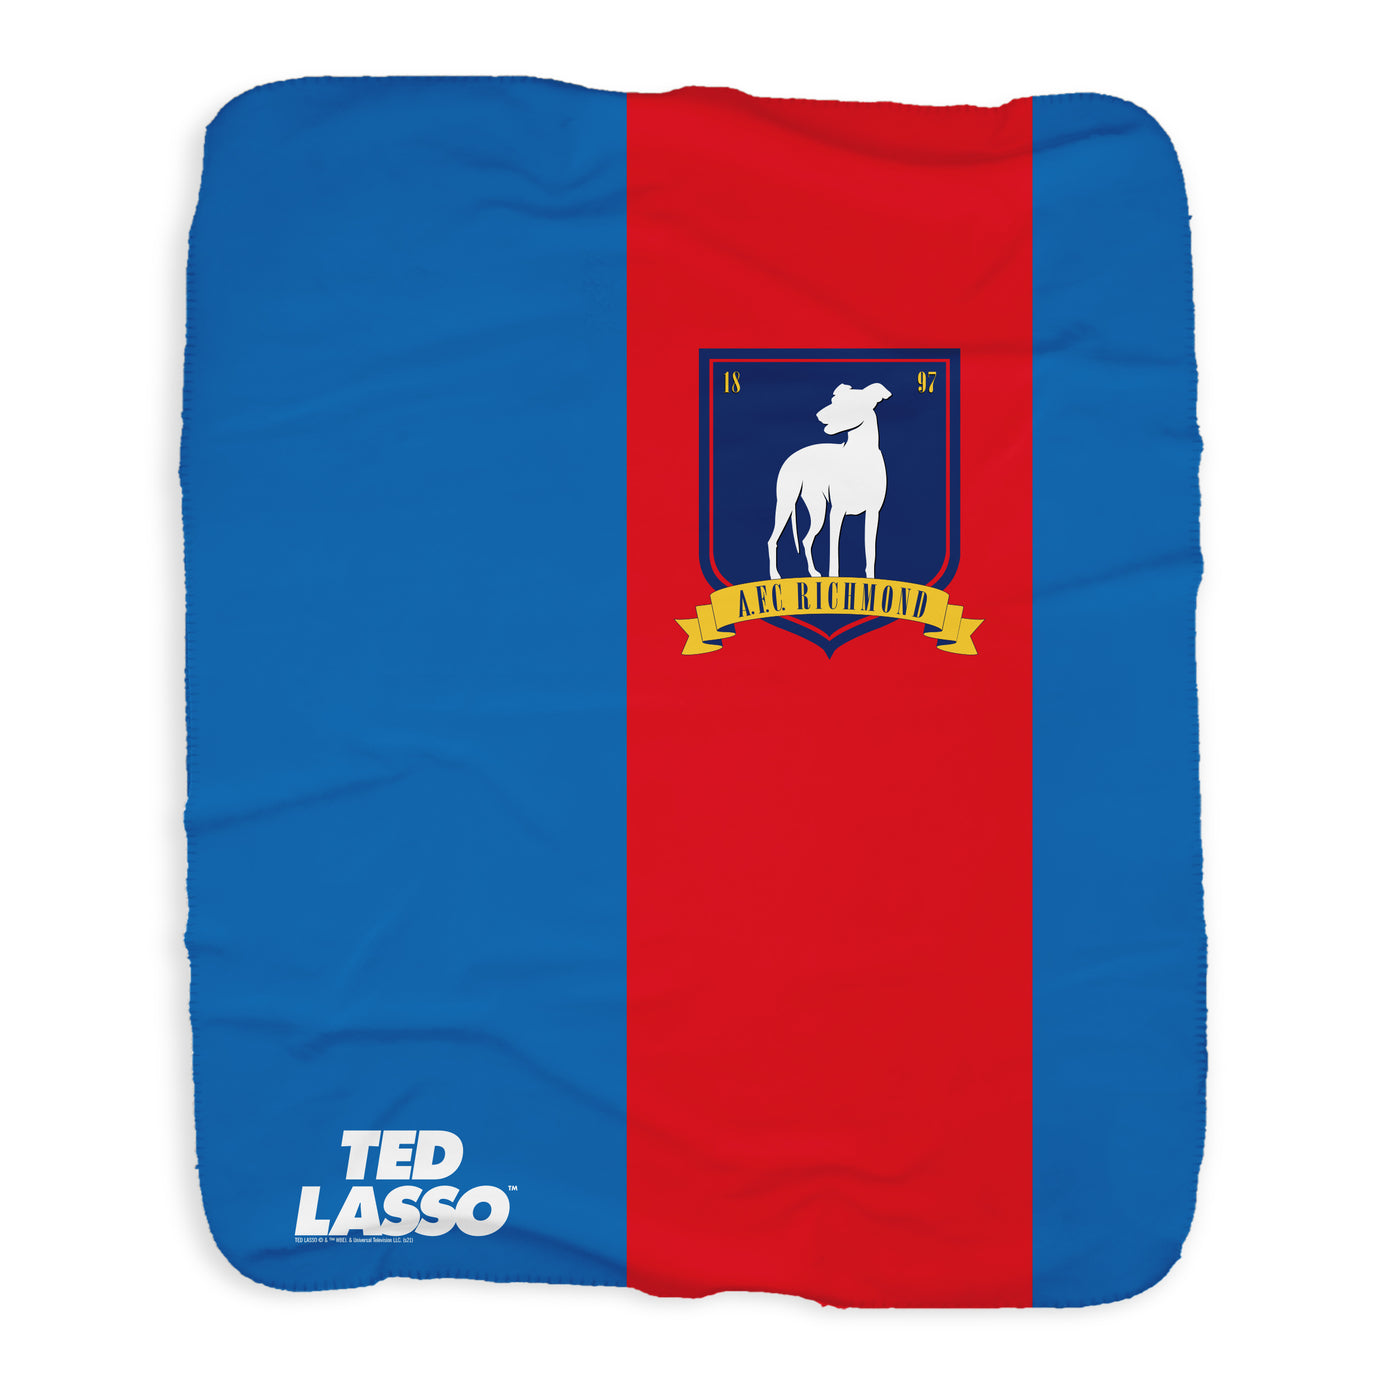 Ted Lasso A.F.C. Richmond Crest Striped Sherpa Blanket